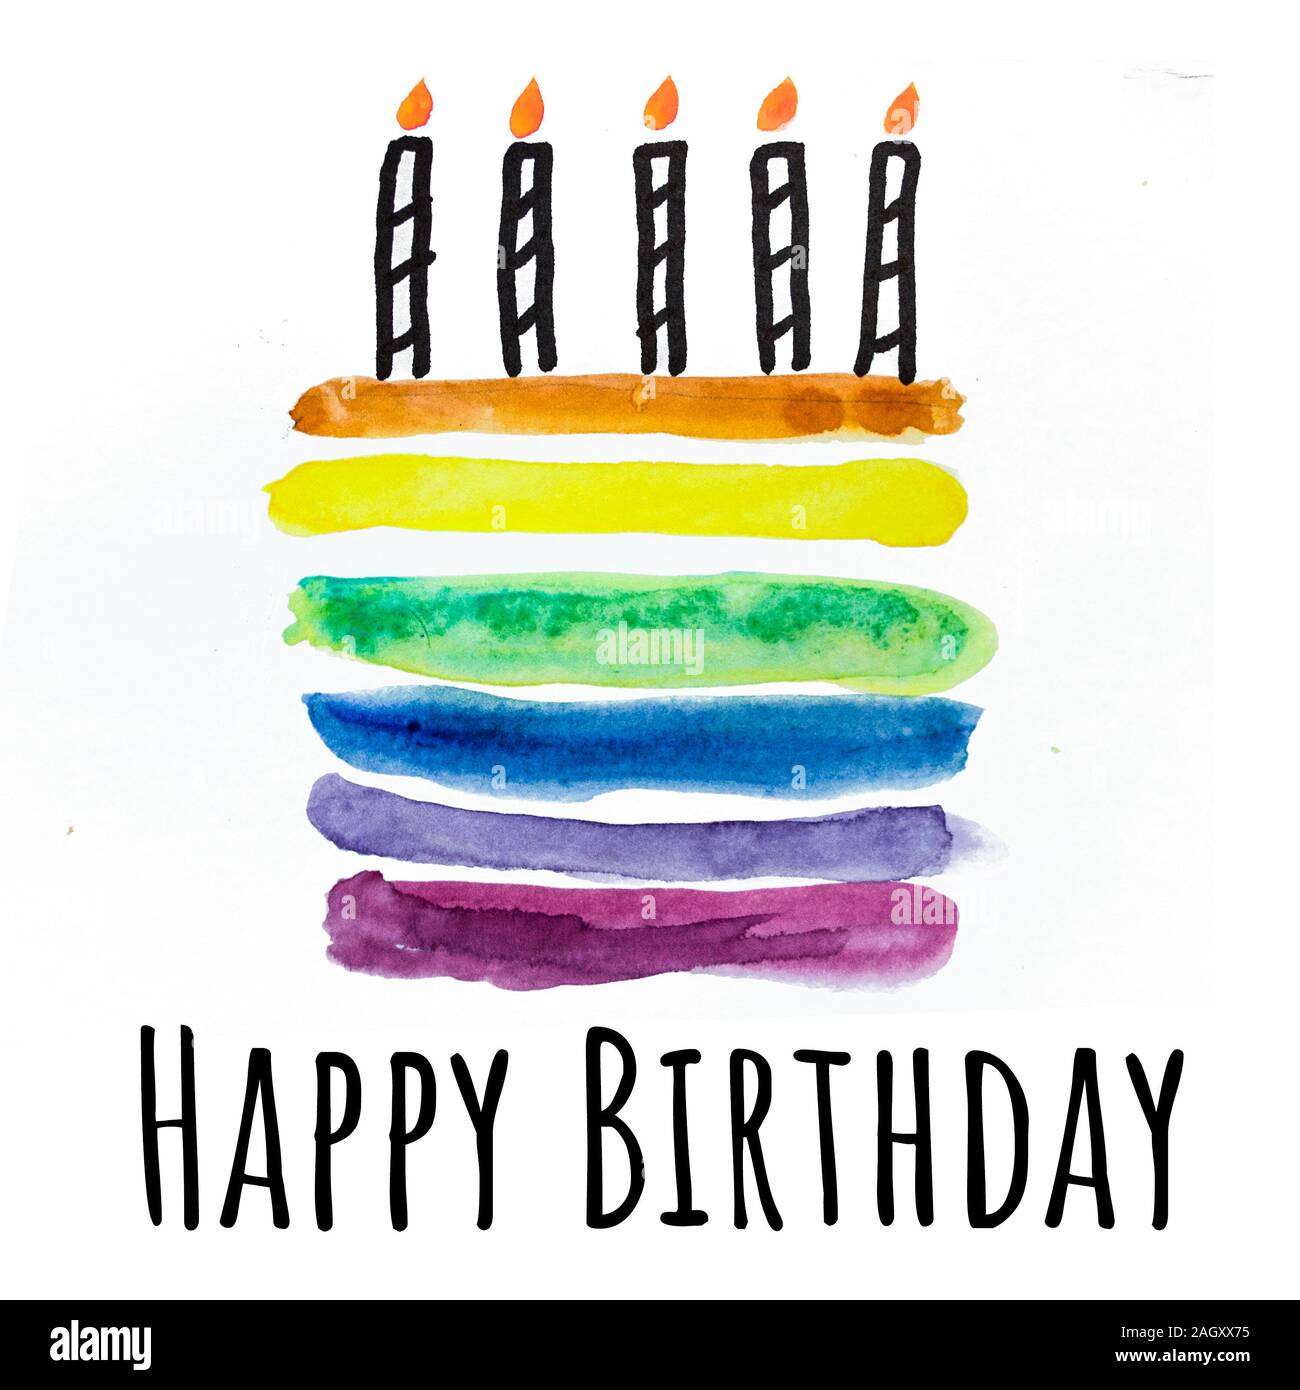 Cake With Candles Watercolor Drawing Birthday Greeting Card Stock Photo Alamy